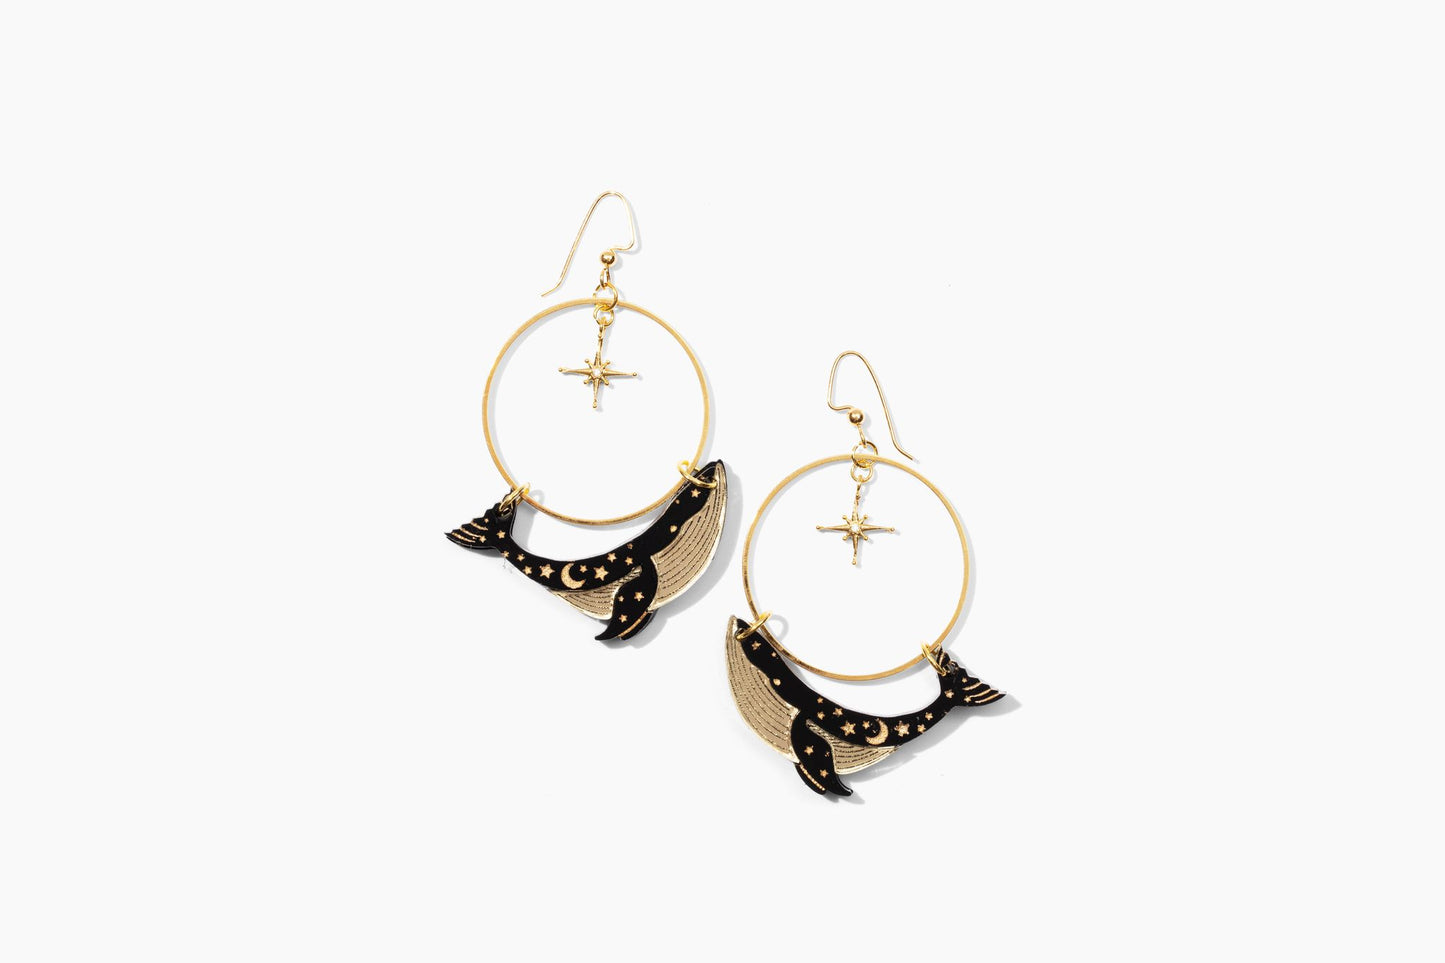 North Star Guide Whale Earrings